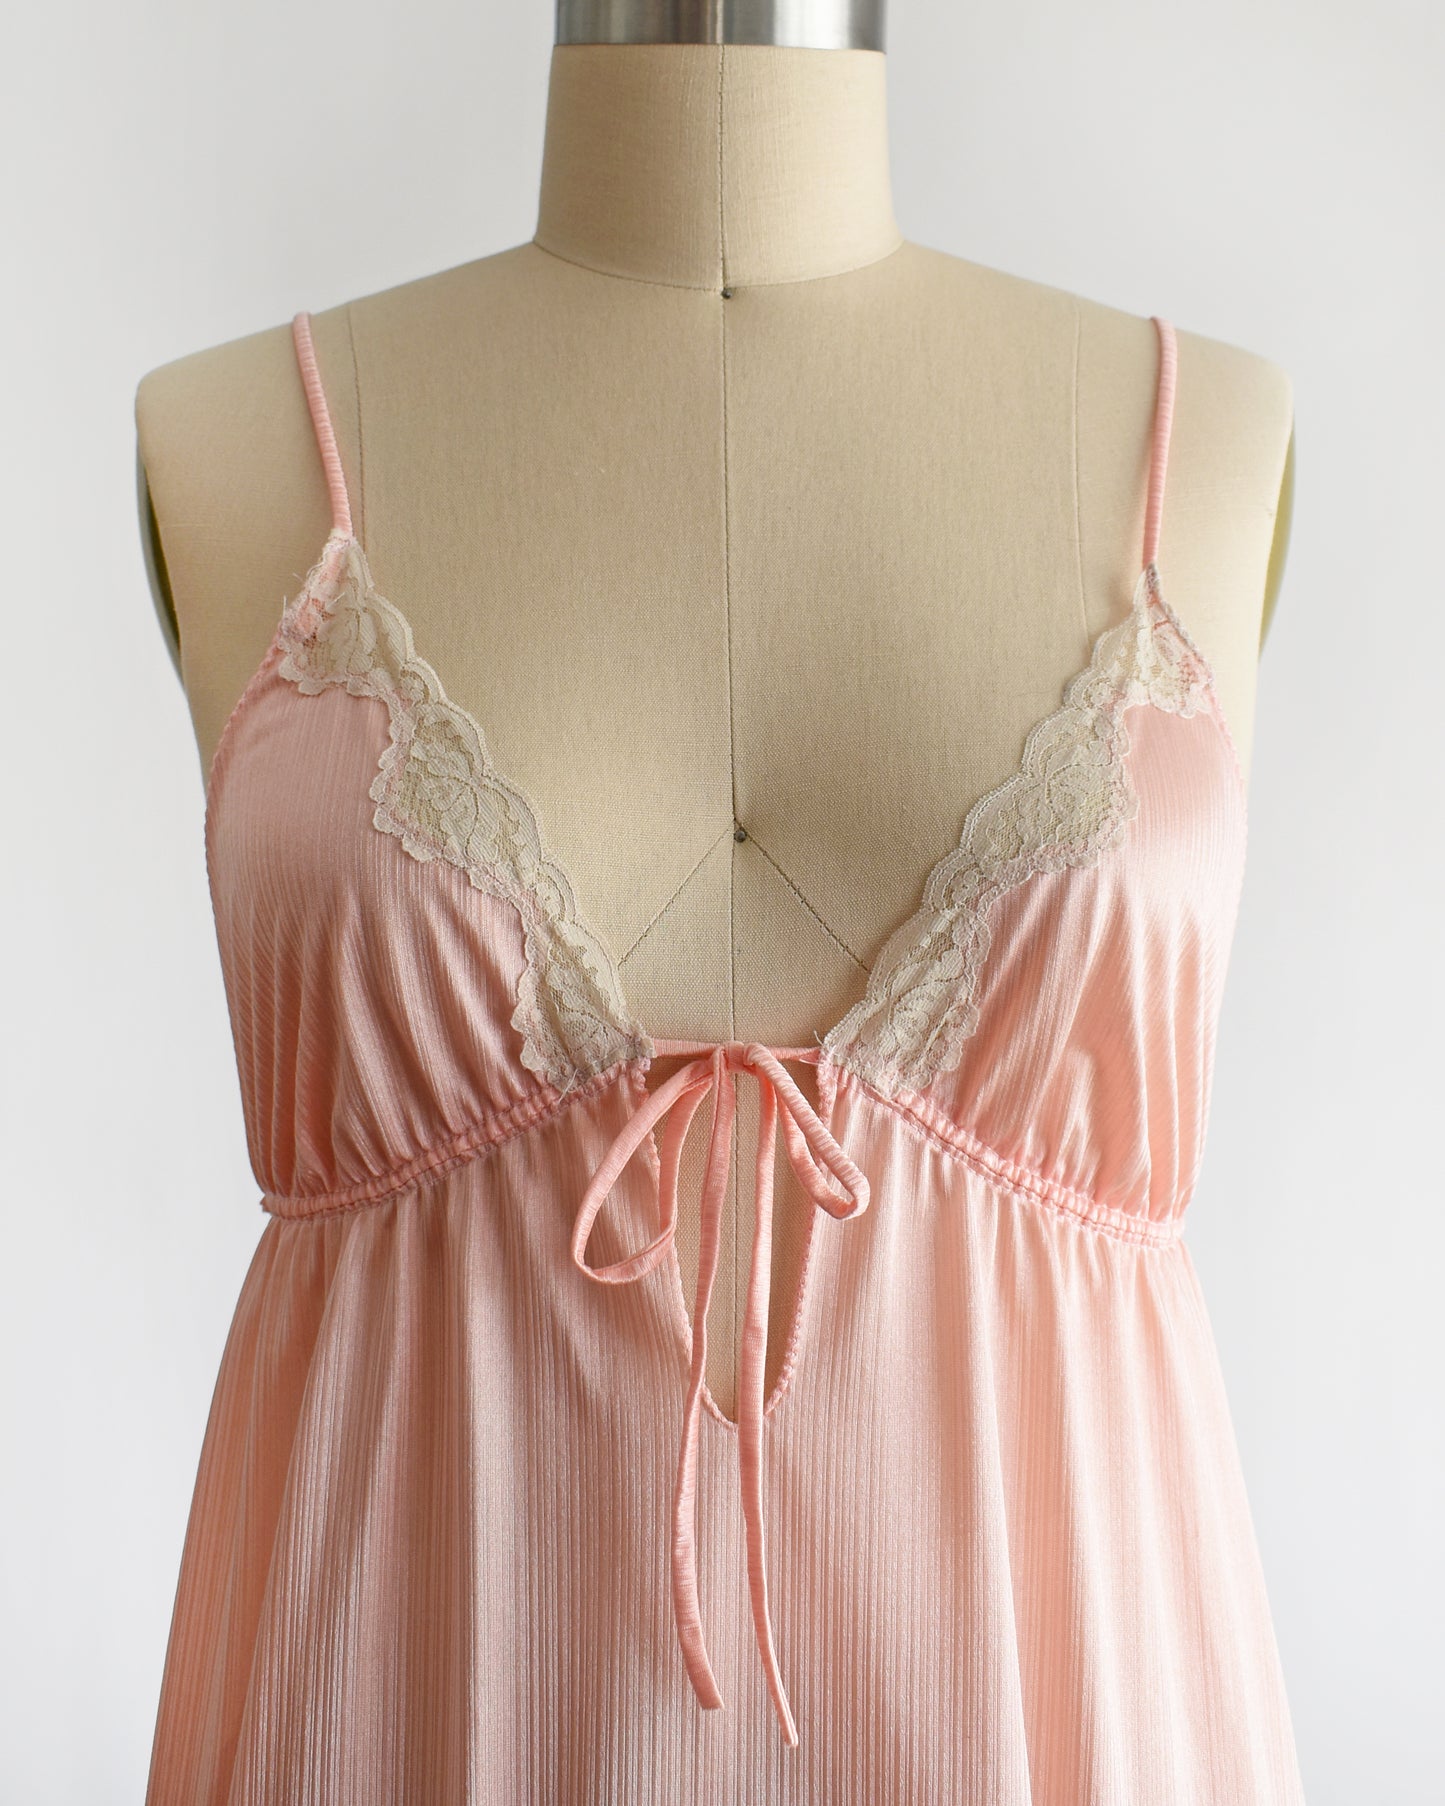 Close up of the bodice of a vintage 1970s peachy pink nightgown that has lace trim and a keyhole tie cutout